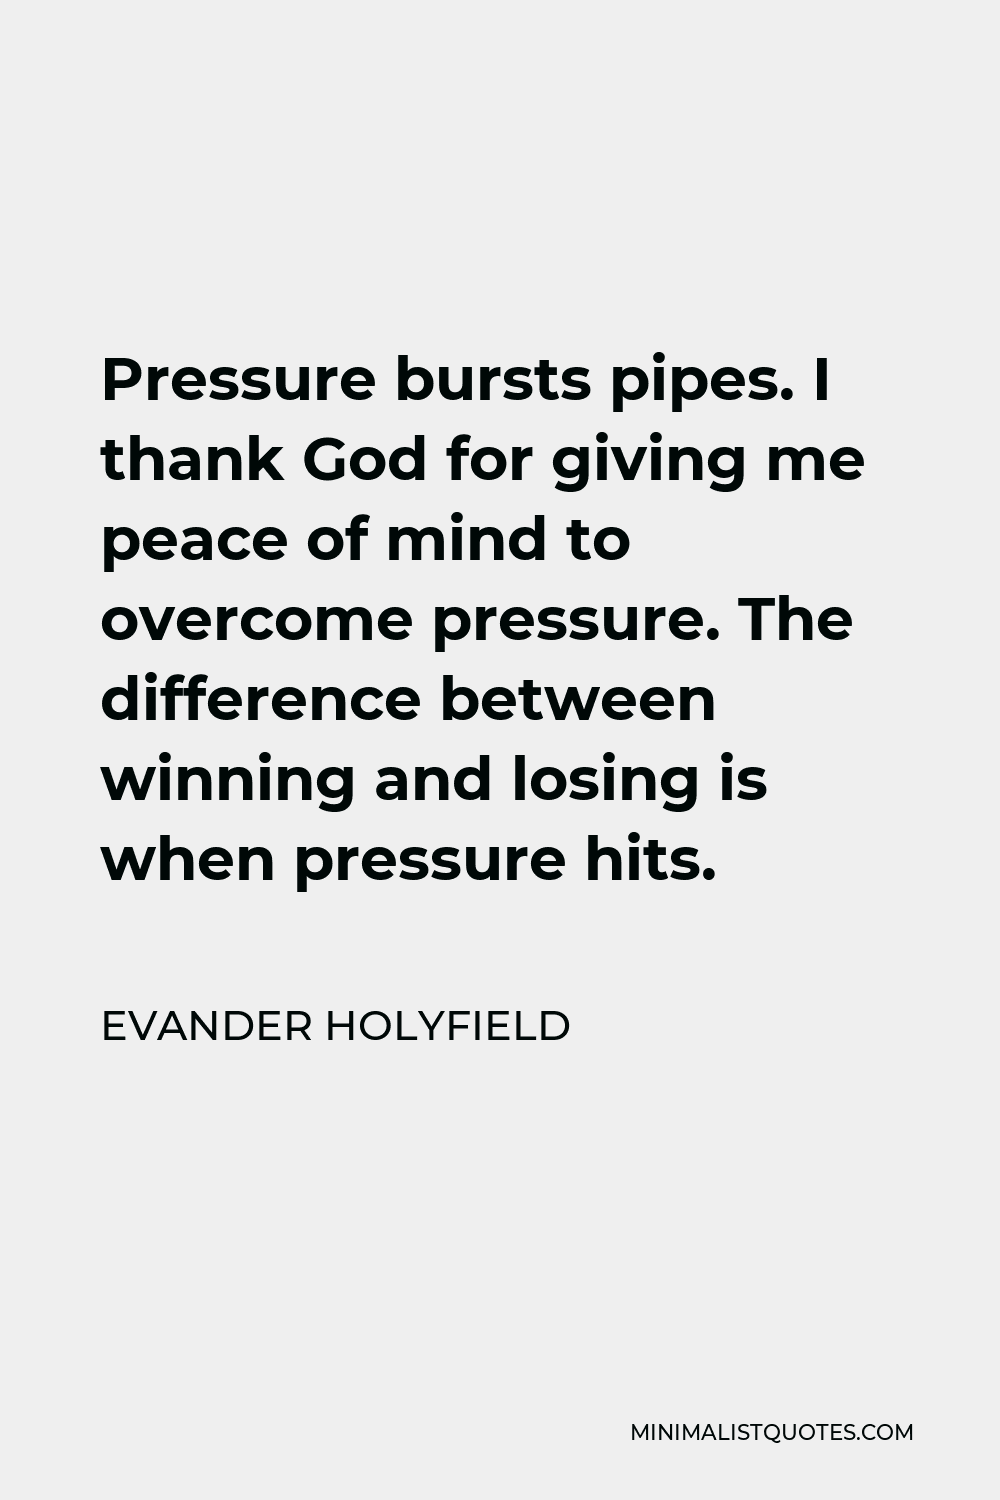 Evander Holyfield Quote - Pressure bursts pipes. I thank God for giving me peace of mind to overcome pressure. The difference between winning and losing is when pressure hits.